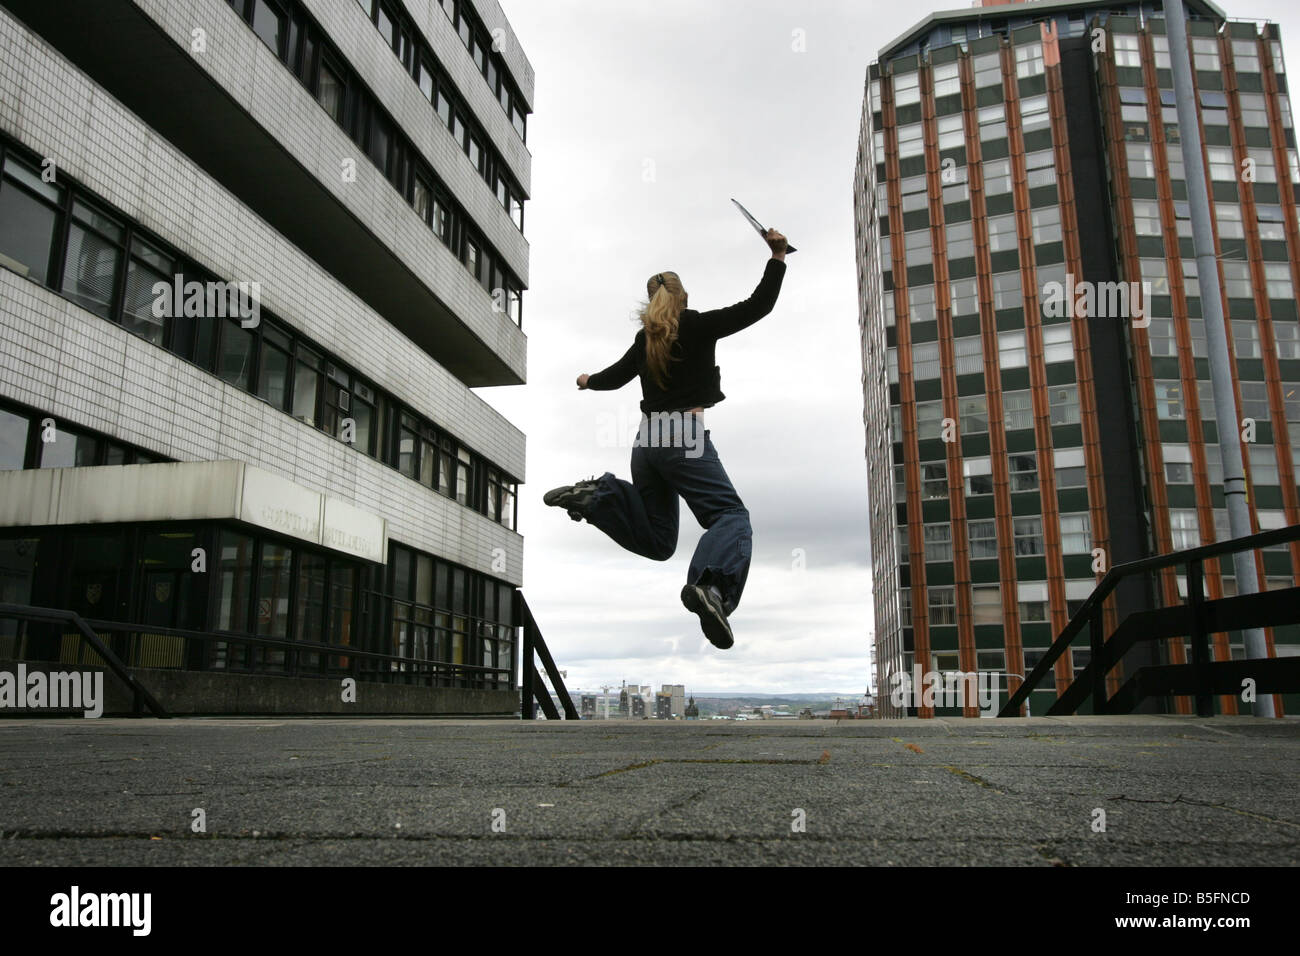 General View of a student celebrating at Strathclyde University in Glasgow, Scotland Stock Photo